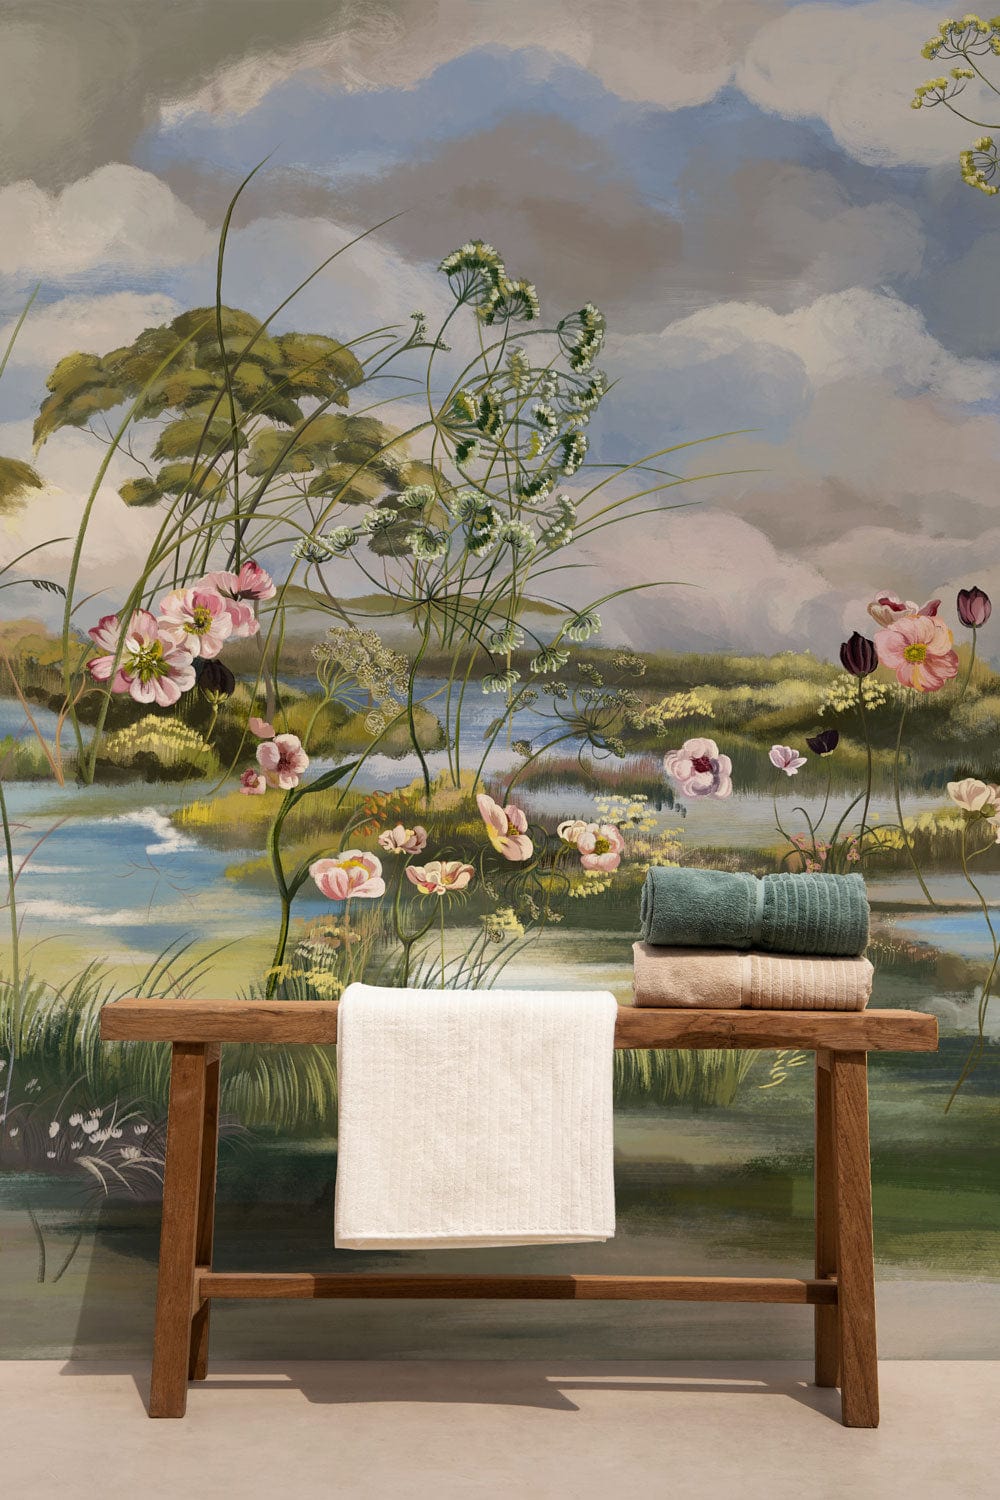 wallpaper mural with a vintage flower on a swamp for the interior of a lounge.